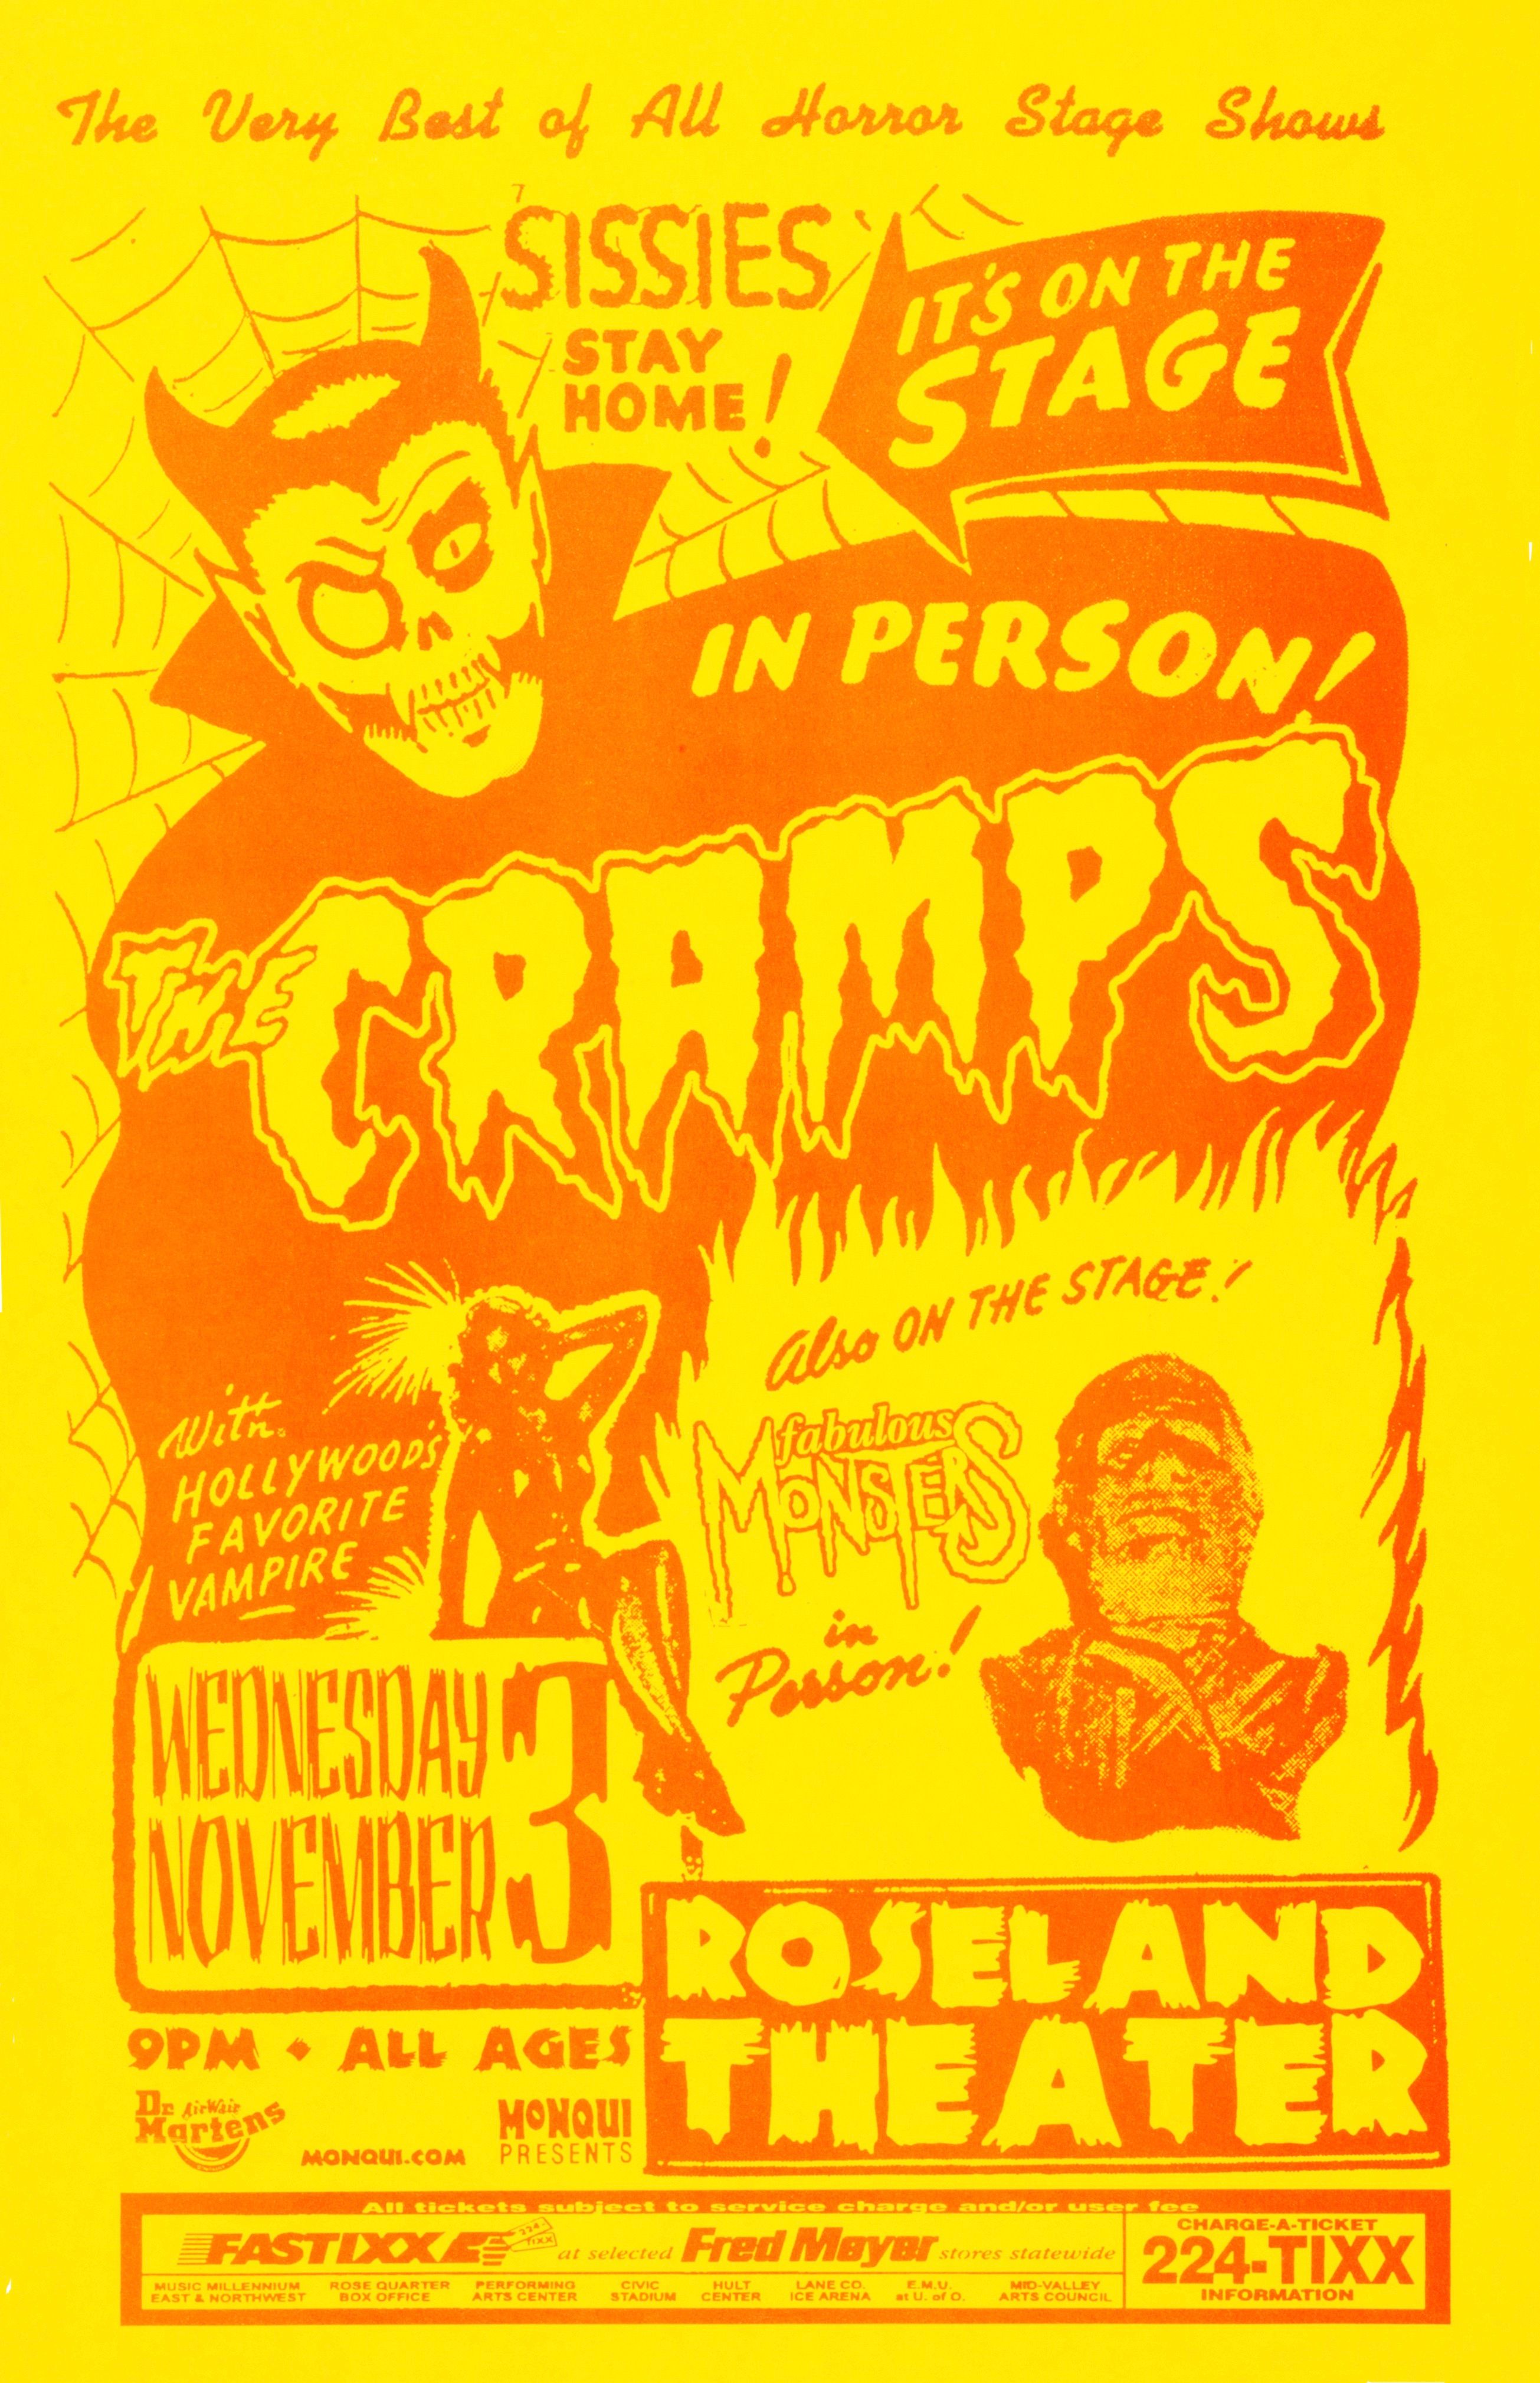 MXP-51.2 The Cramps Roseland Theater 1999 Concert Poster